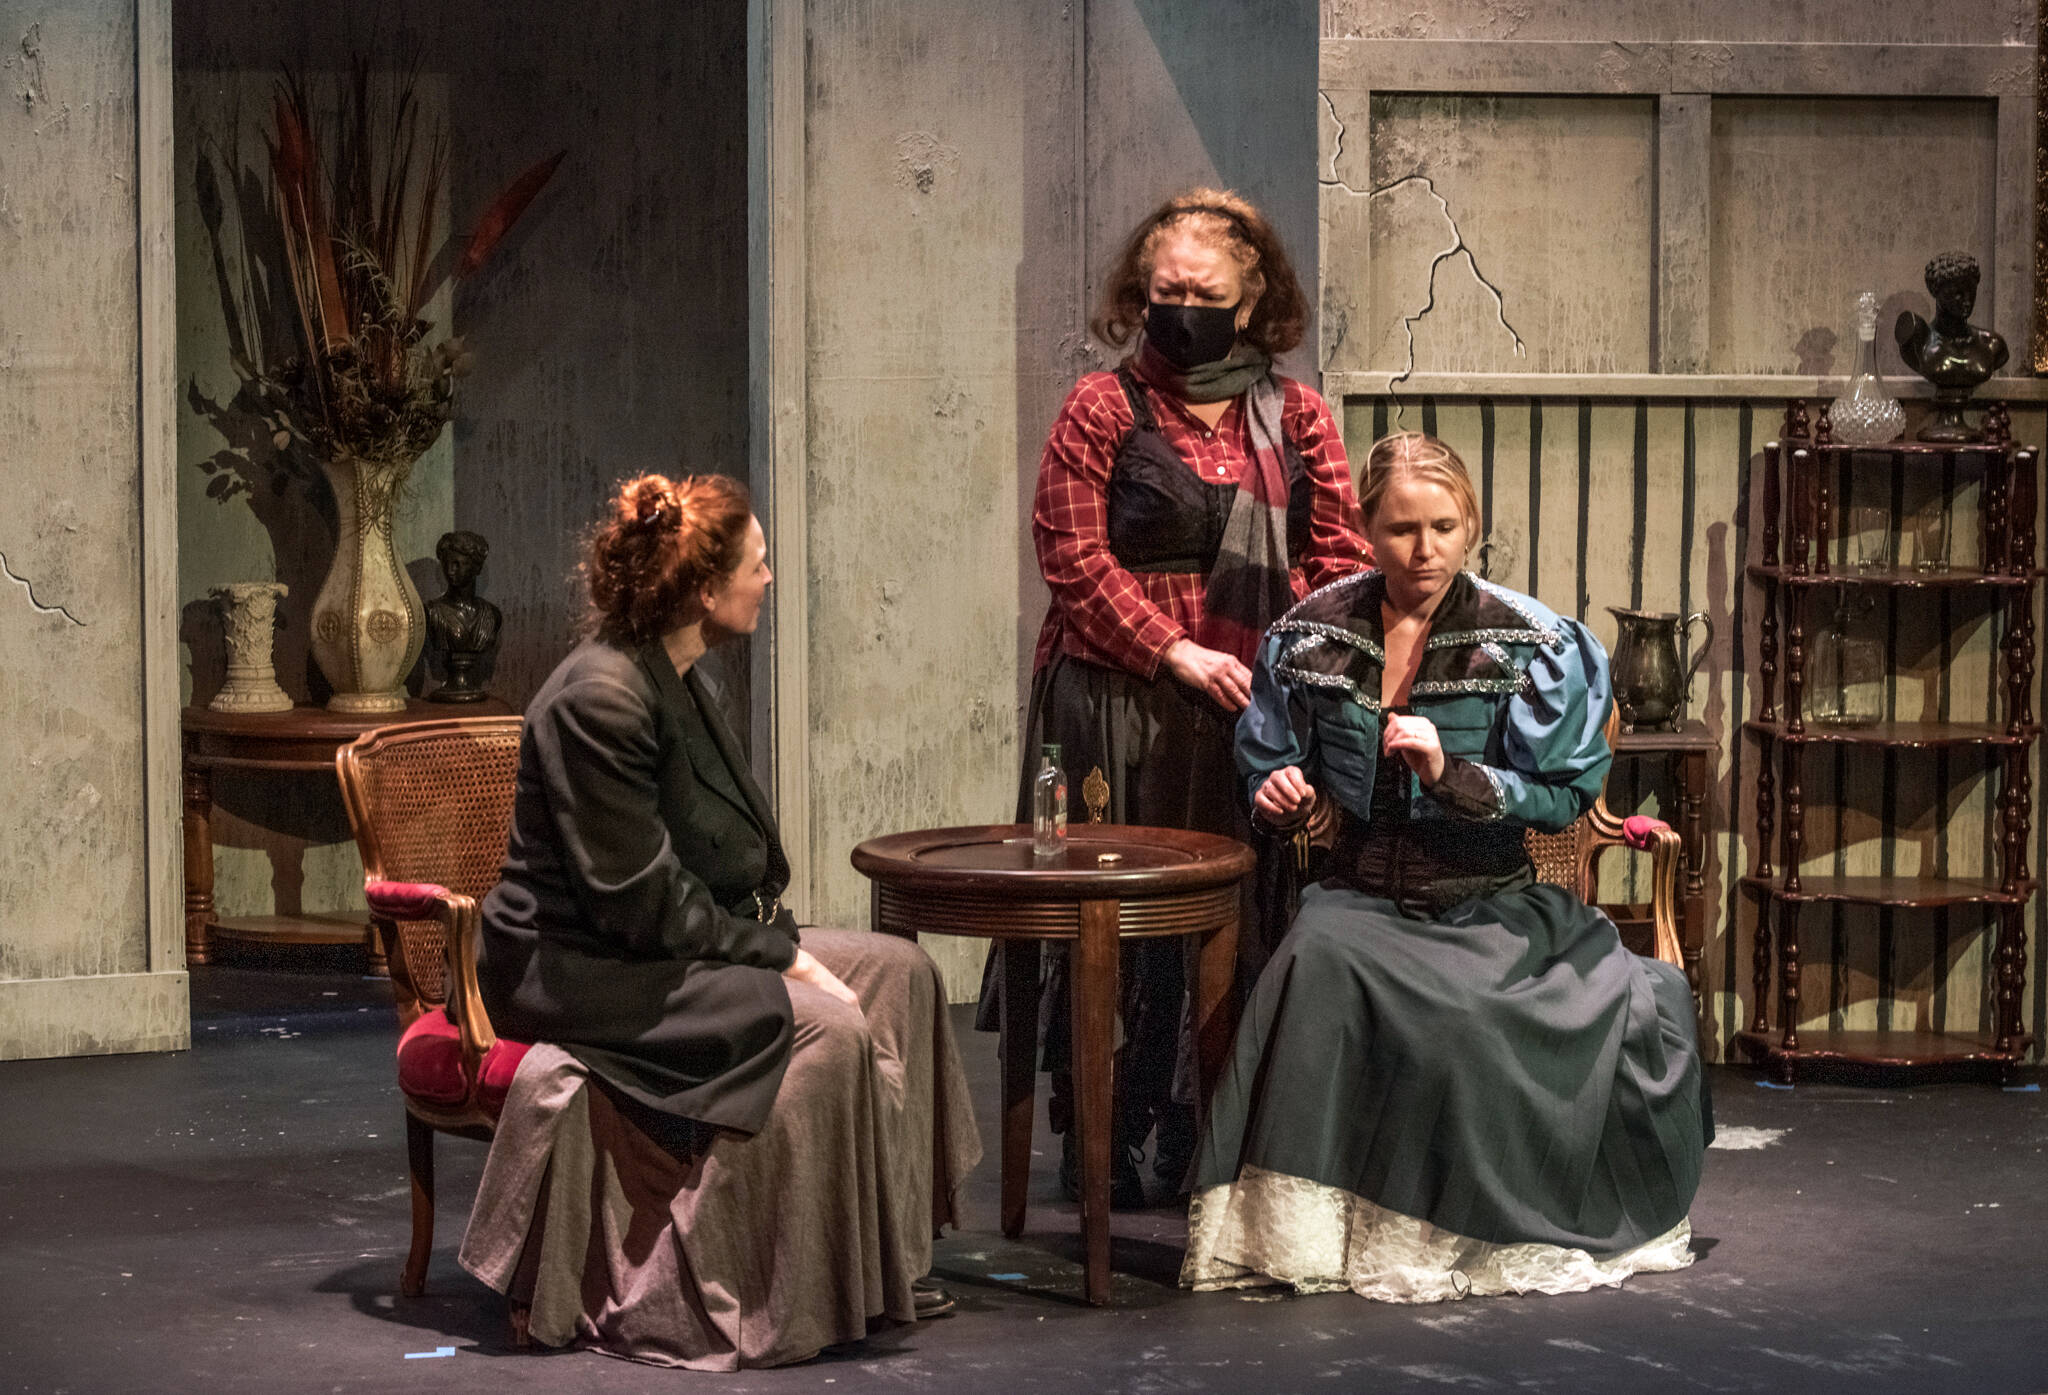 Julie Borden as the housekeeper Elizabeth comforts her mistress, Sierra Brittal as Mrs. Manningham, as she dialogues with Maude Eisele playing Detective Rough in the play “Angel Street” which will run for 2 weeks at Olympic Theatre Arts in Sequim. Sequim Gazette photo by Emily Matthiessen